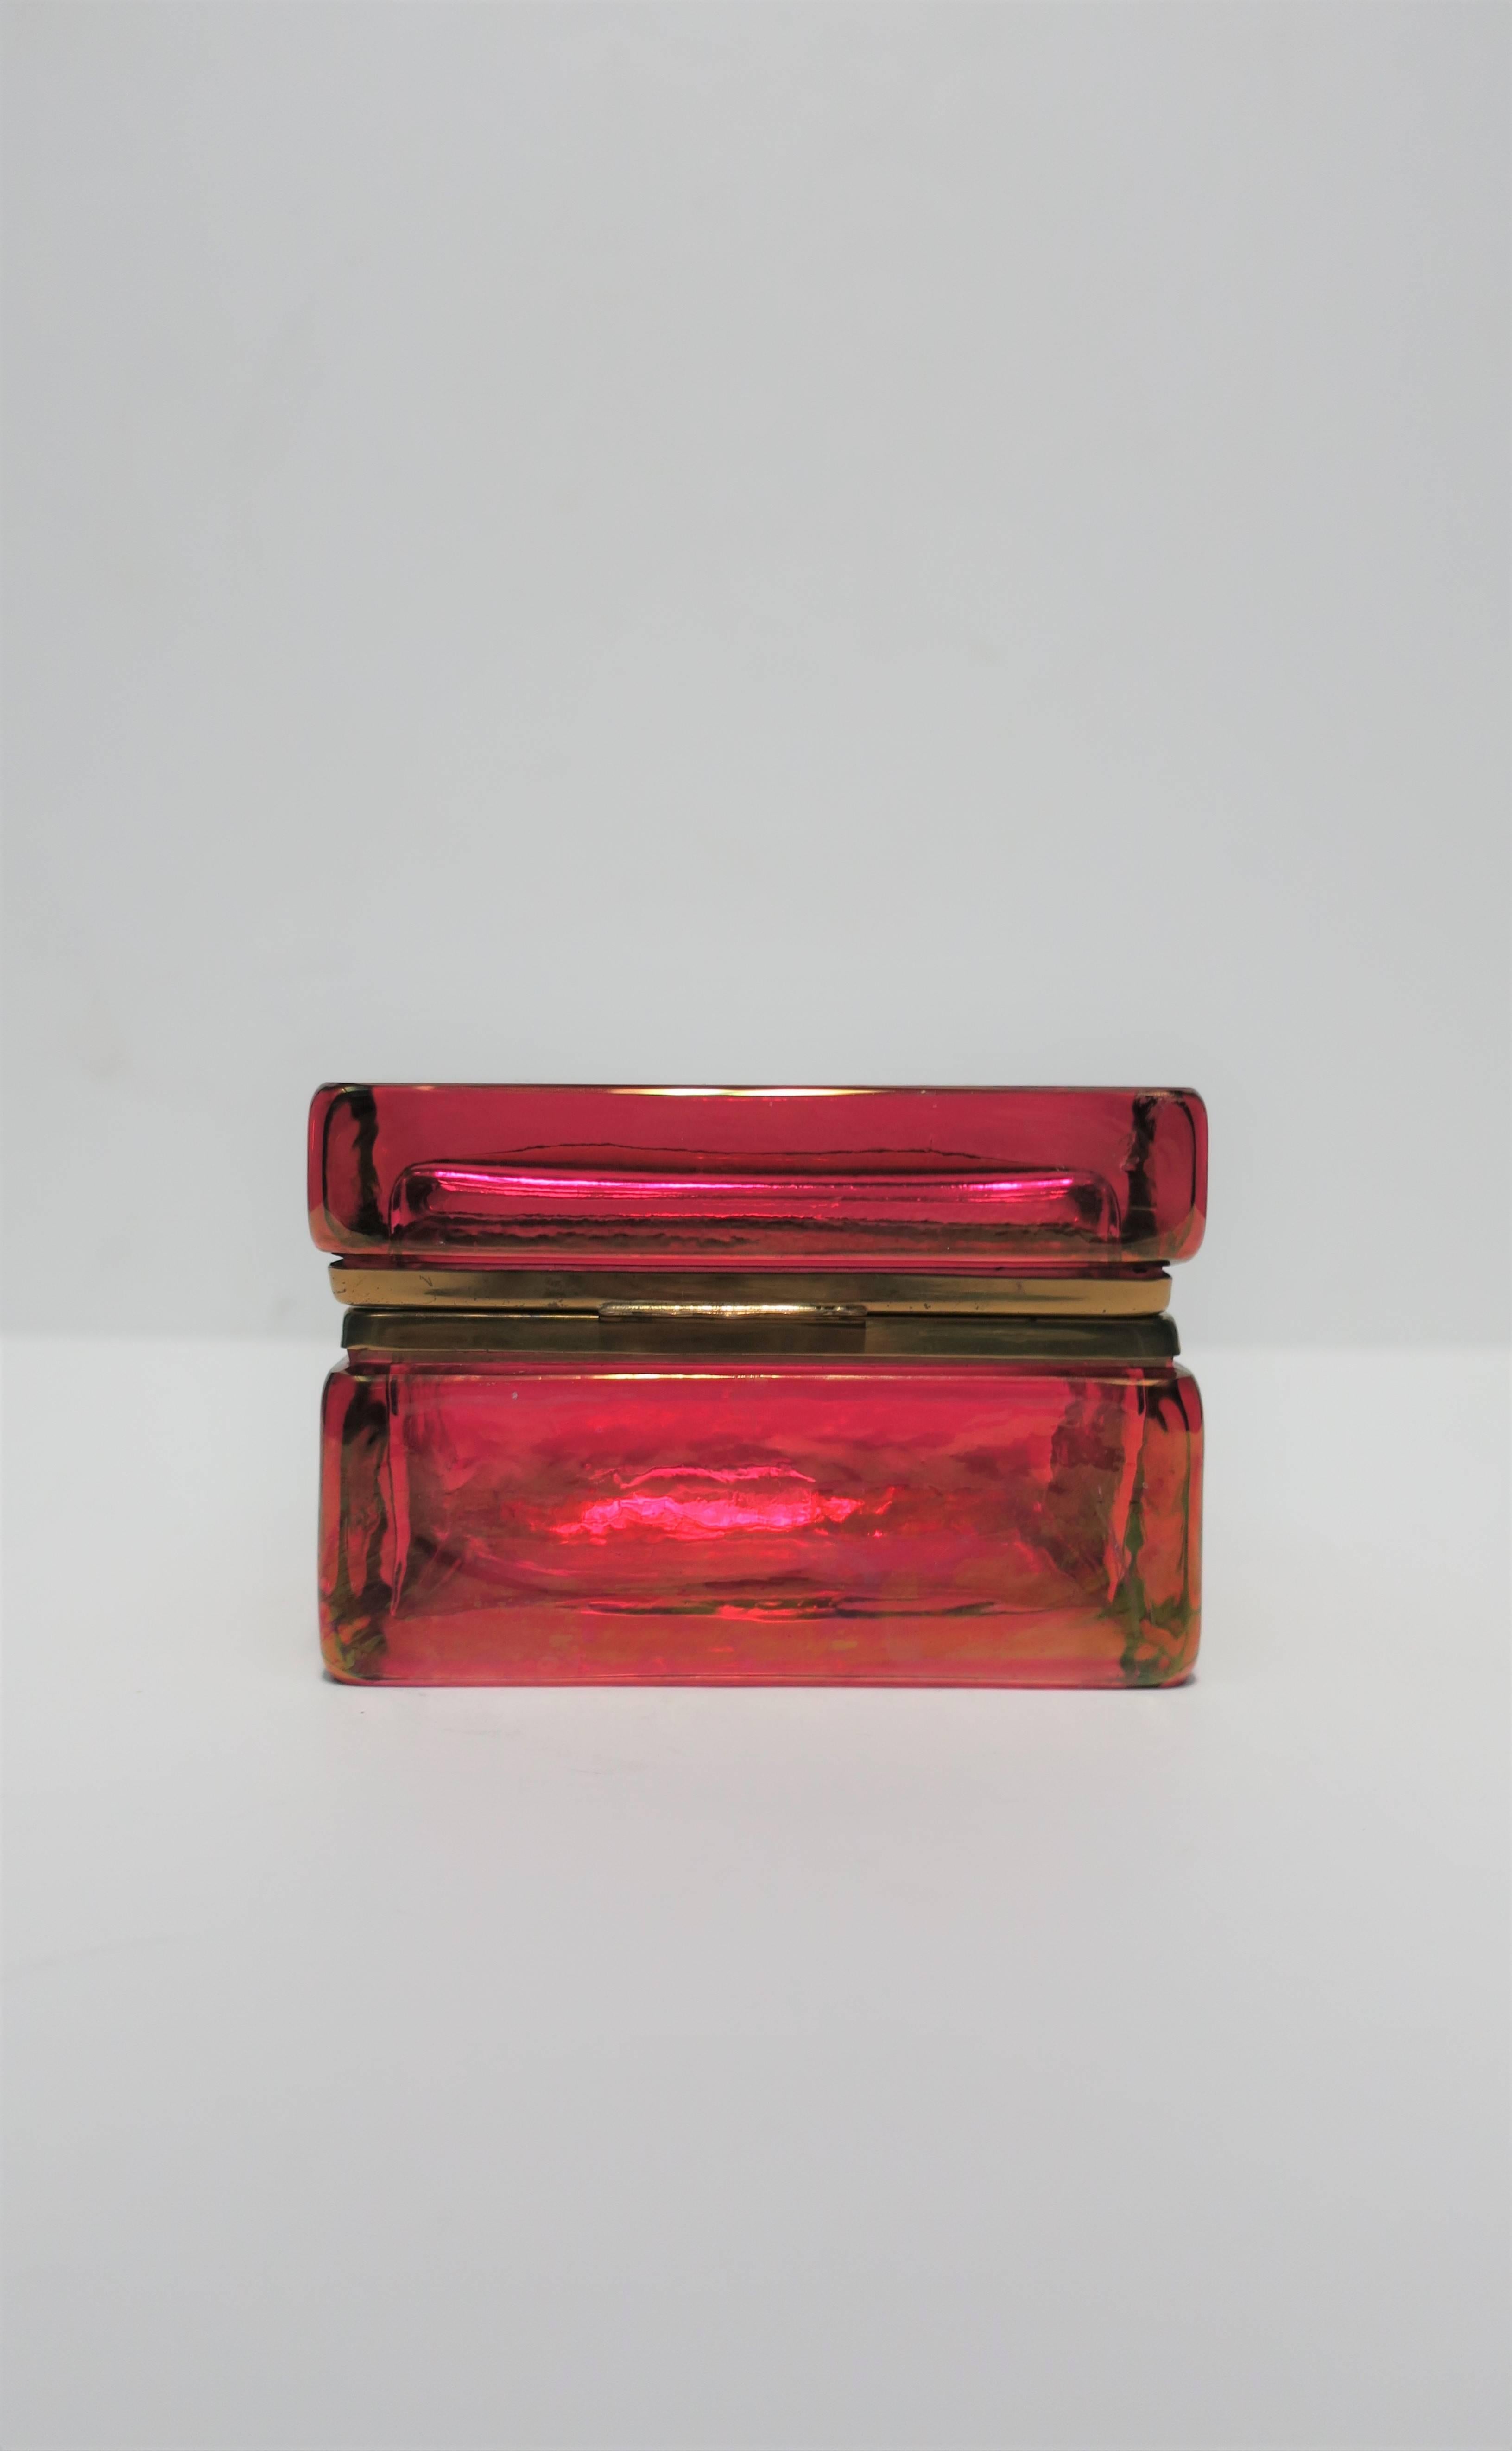 A beautiful and striking Modern Italian red art glass, with brass hinge, jewelry or vanity box, circa early 20th century, Italy.

Box measures: 3.5 in. H x 5.25 W x 3.25 D. 

Item available here online. By request, item can be made available by